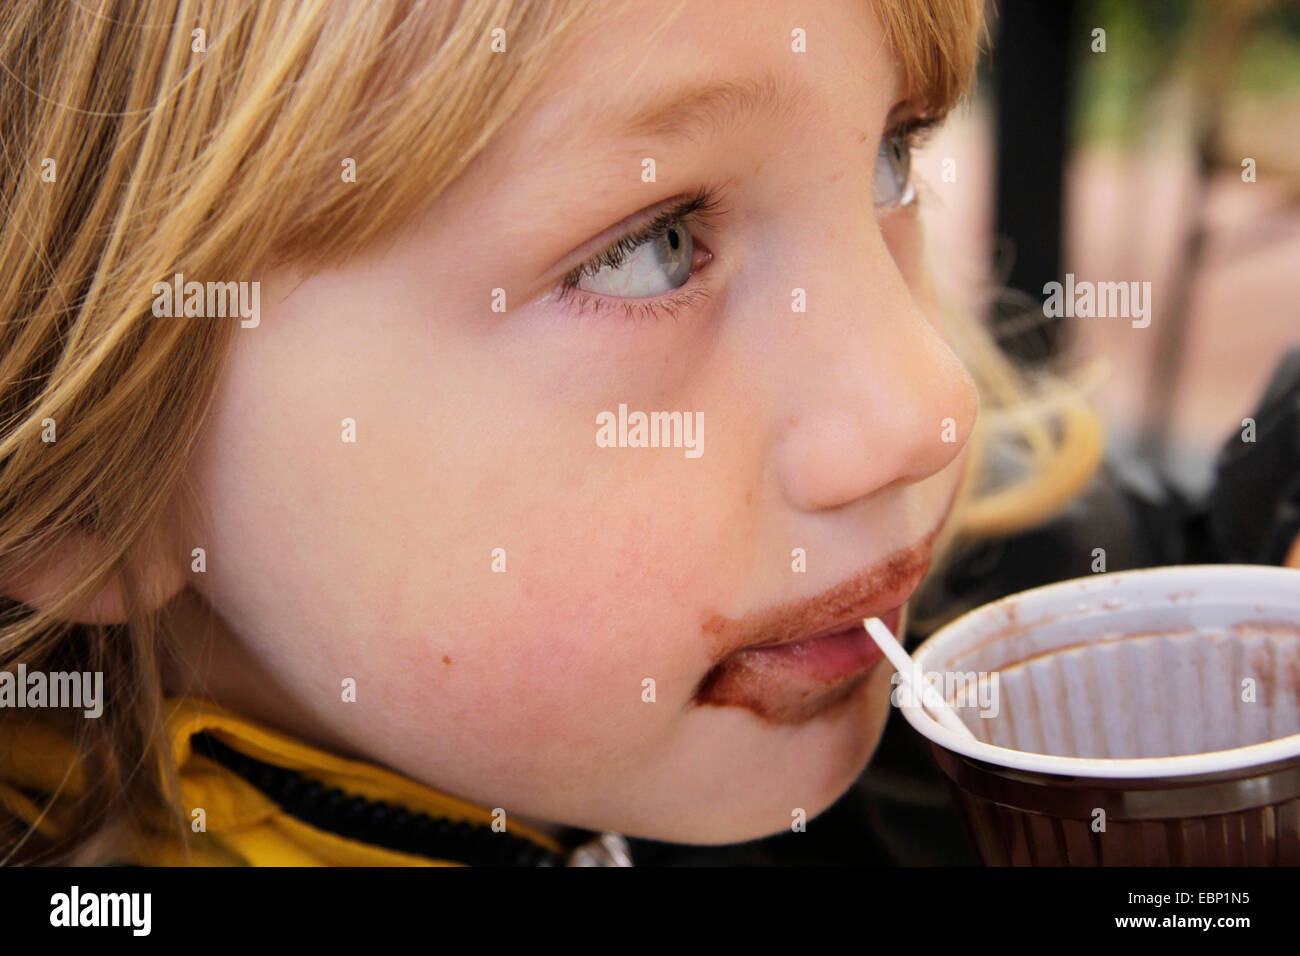 little boy with smeared mouth, Germany Stock Photo